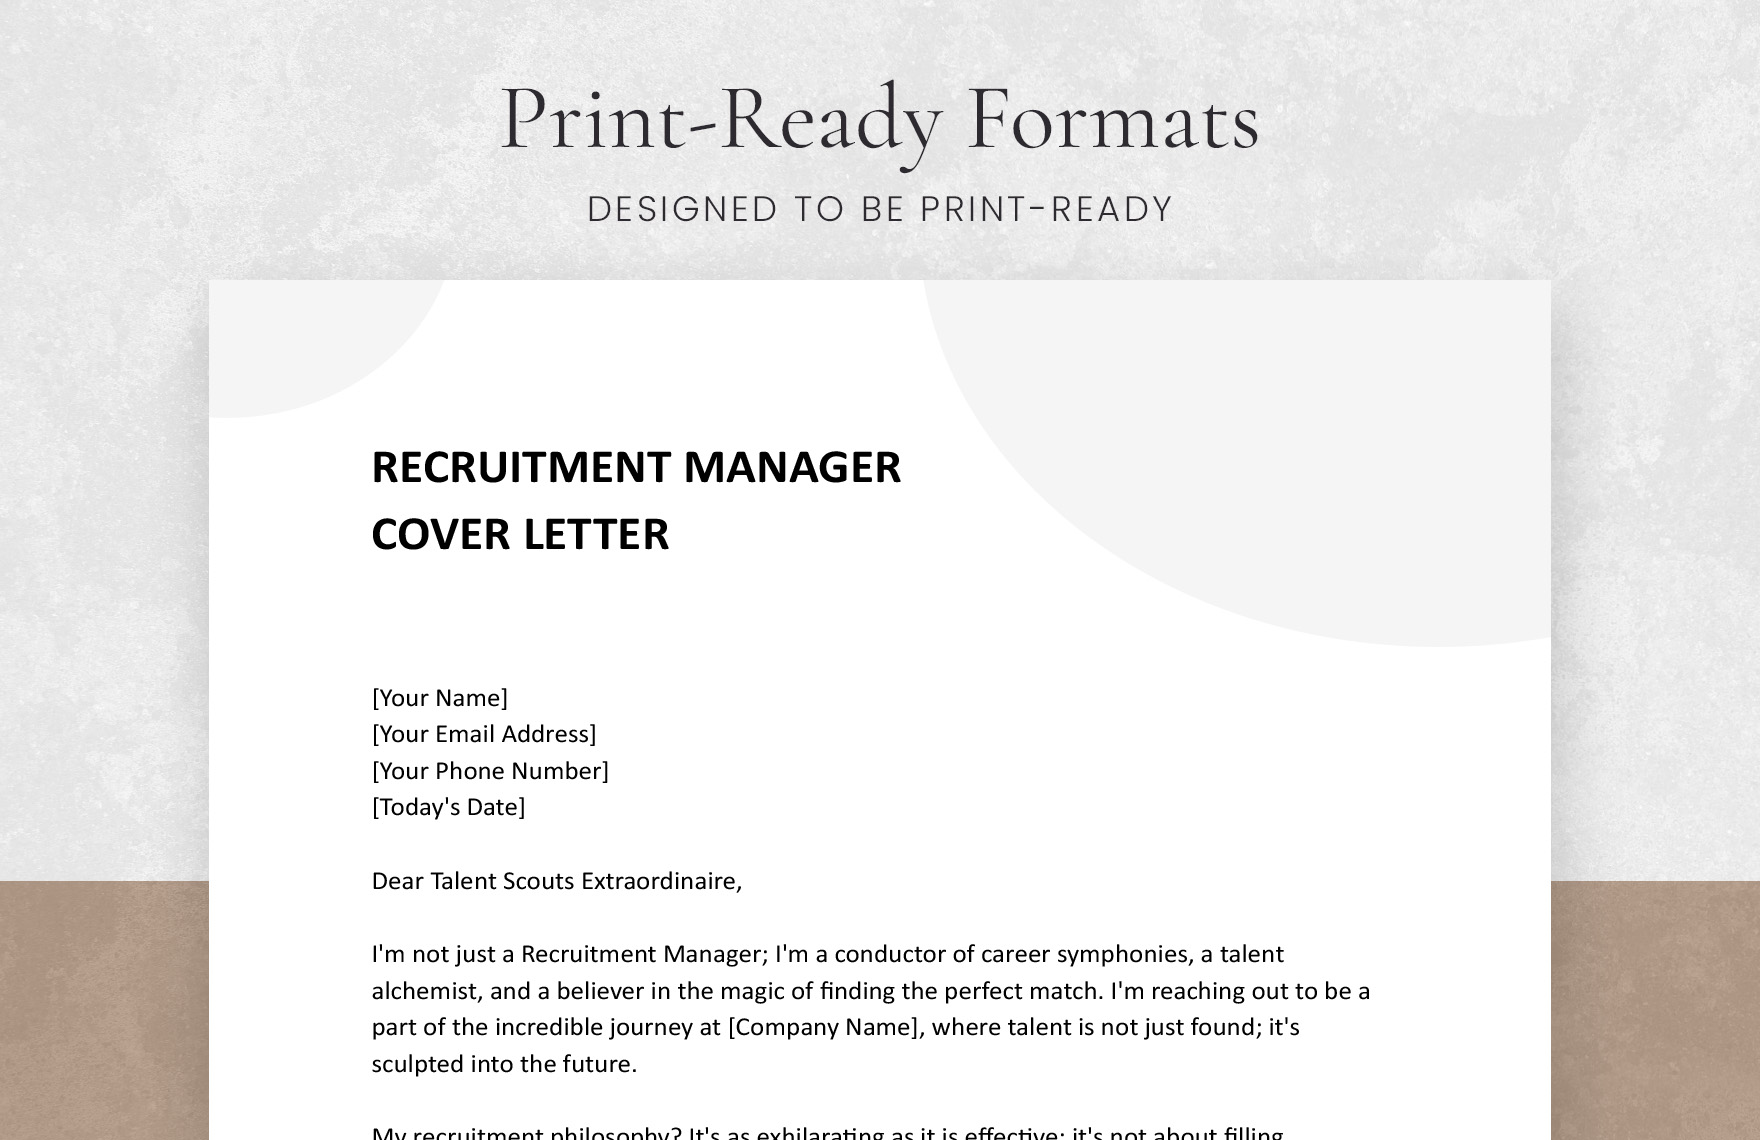 Recruitment Manager Cover Letter